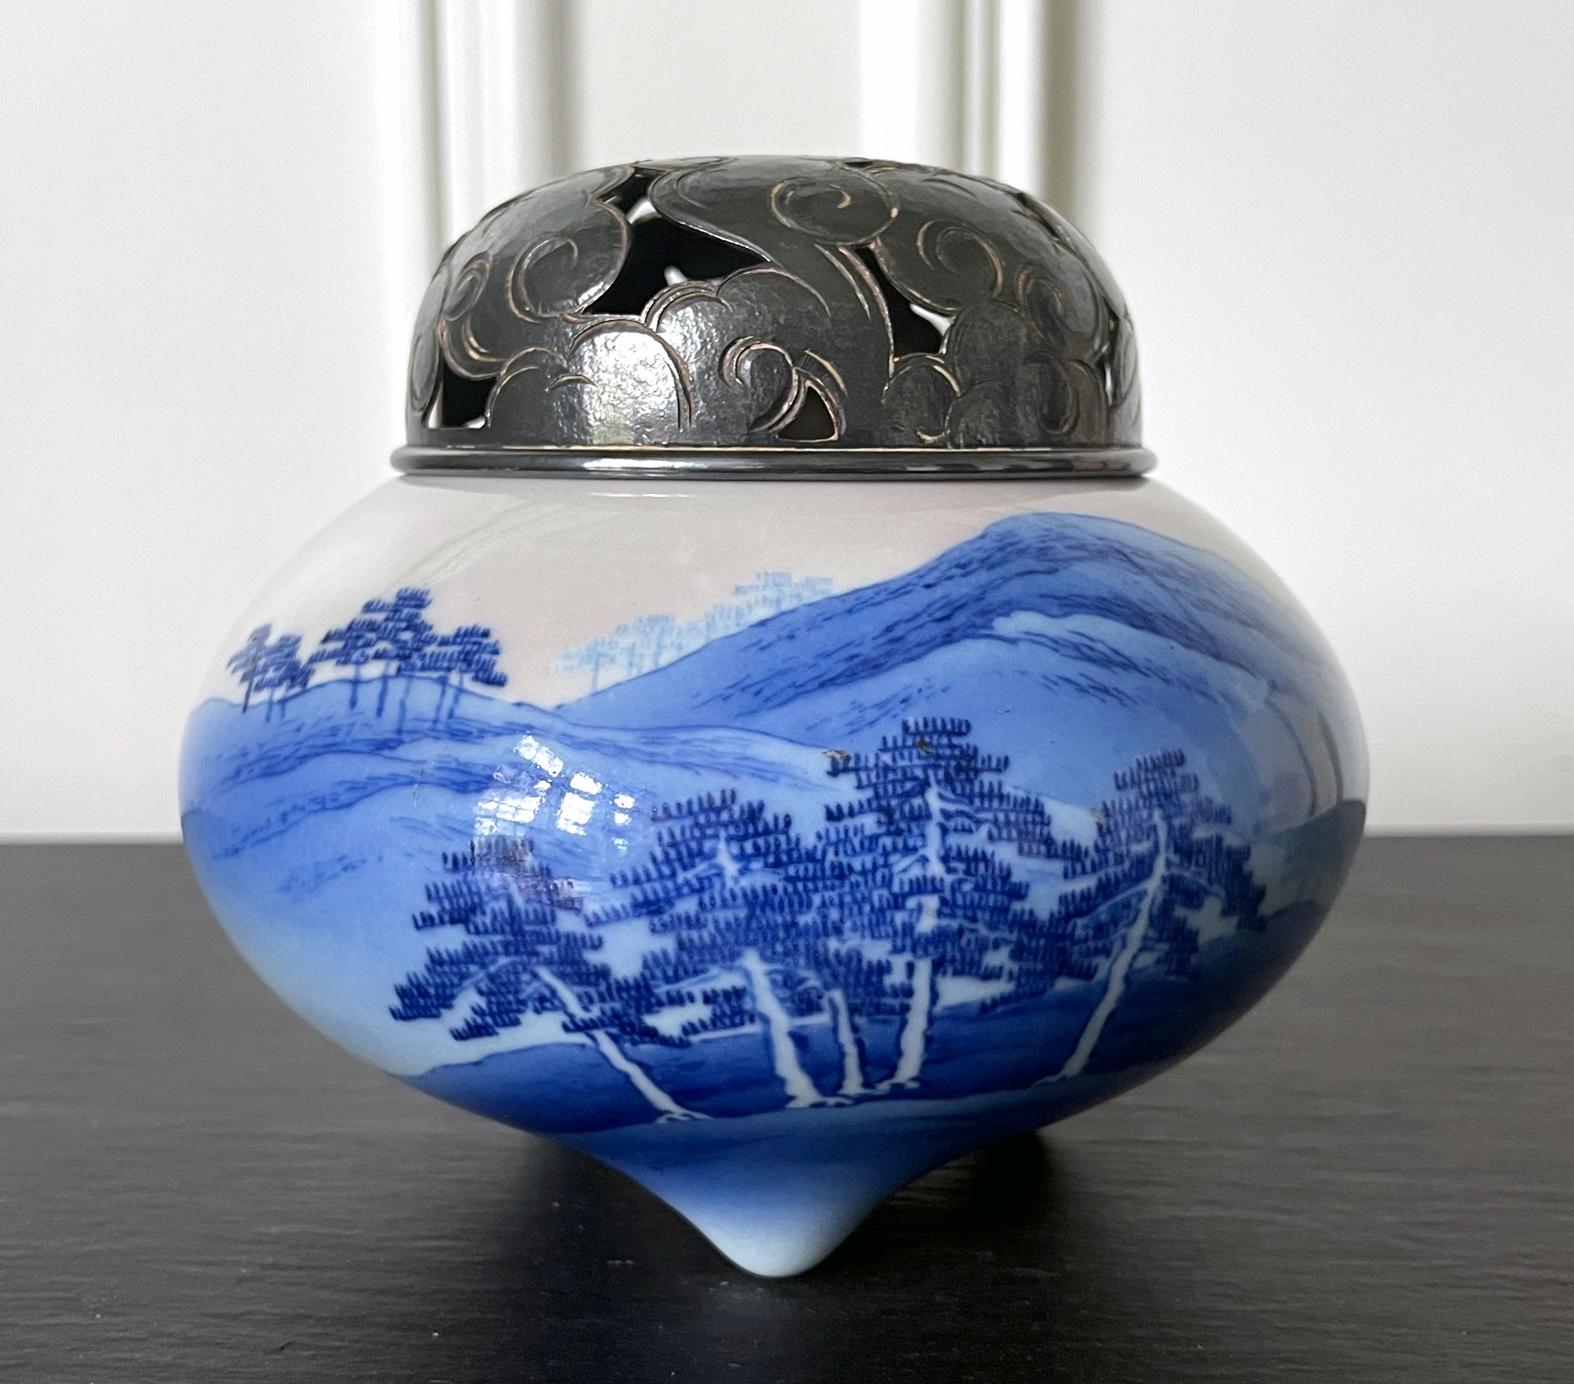 A tri-pod ceramic incense burner (koro) by Japanese Imperial potter Makuzu Kozan (1842-1916) circa late Meiji to the start of Taisho period (1890-1910s). A fine example of the artist's work belonging to the late part of his underglaze paint phase